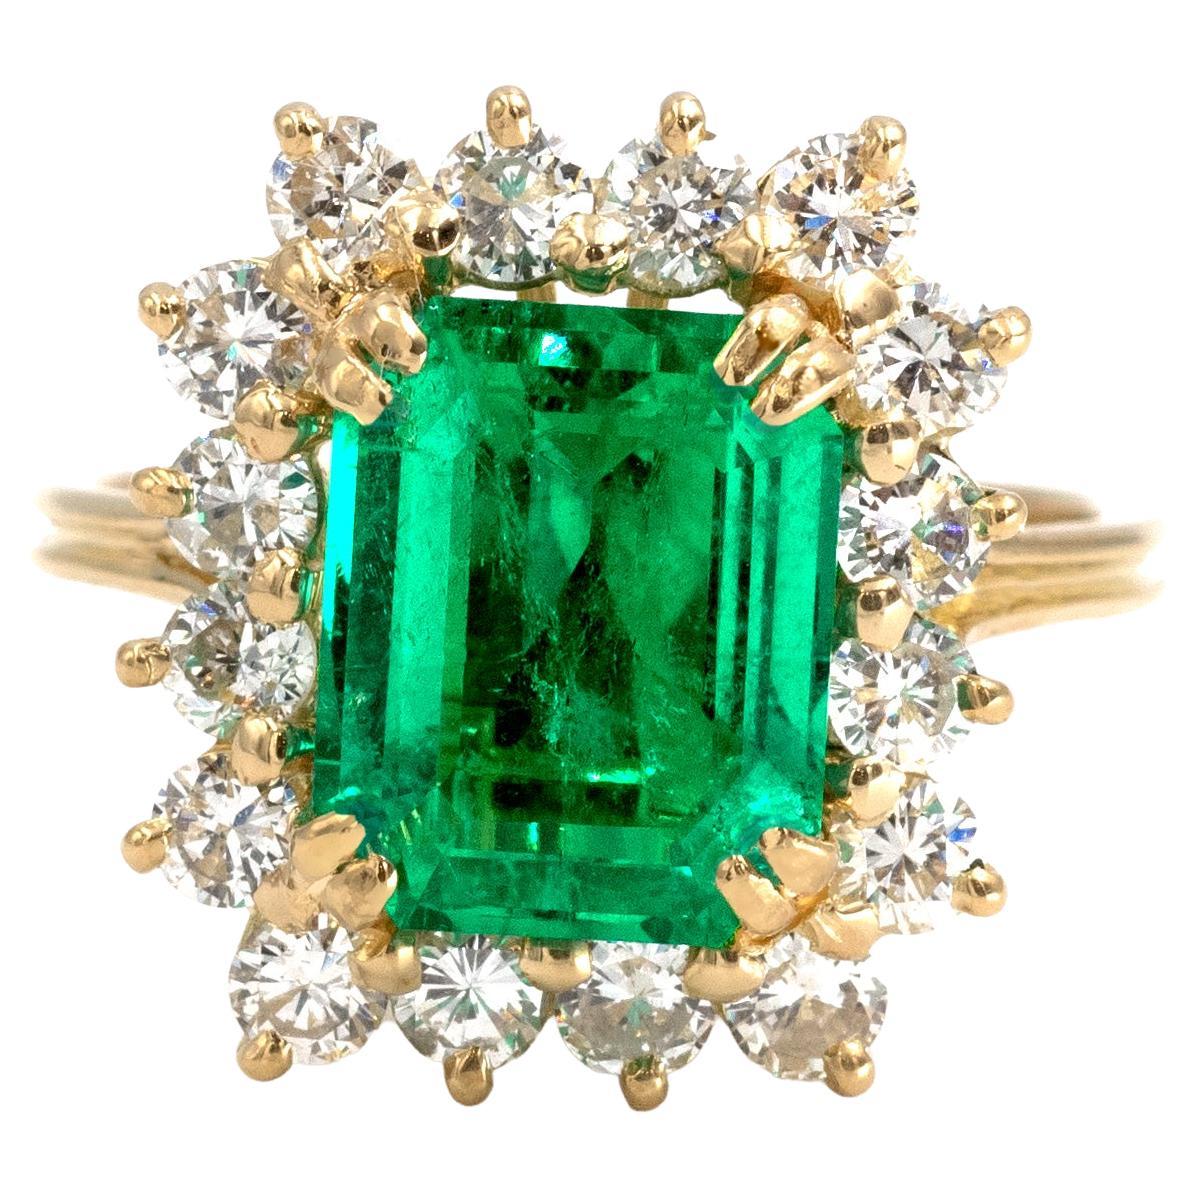 Certified 3.04 Carat Minor Oil Colombian Emerald 18-KT Gold Halo Ring